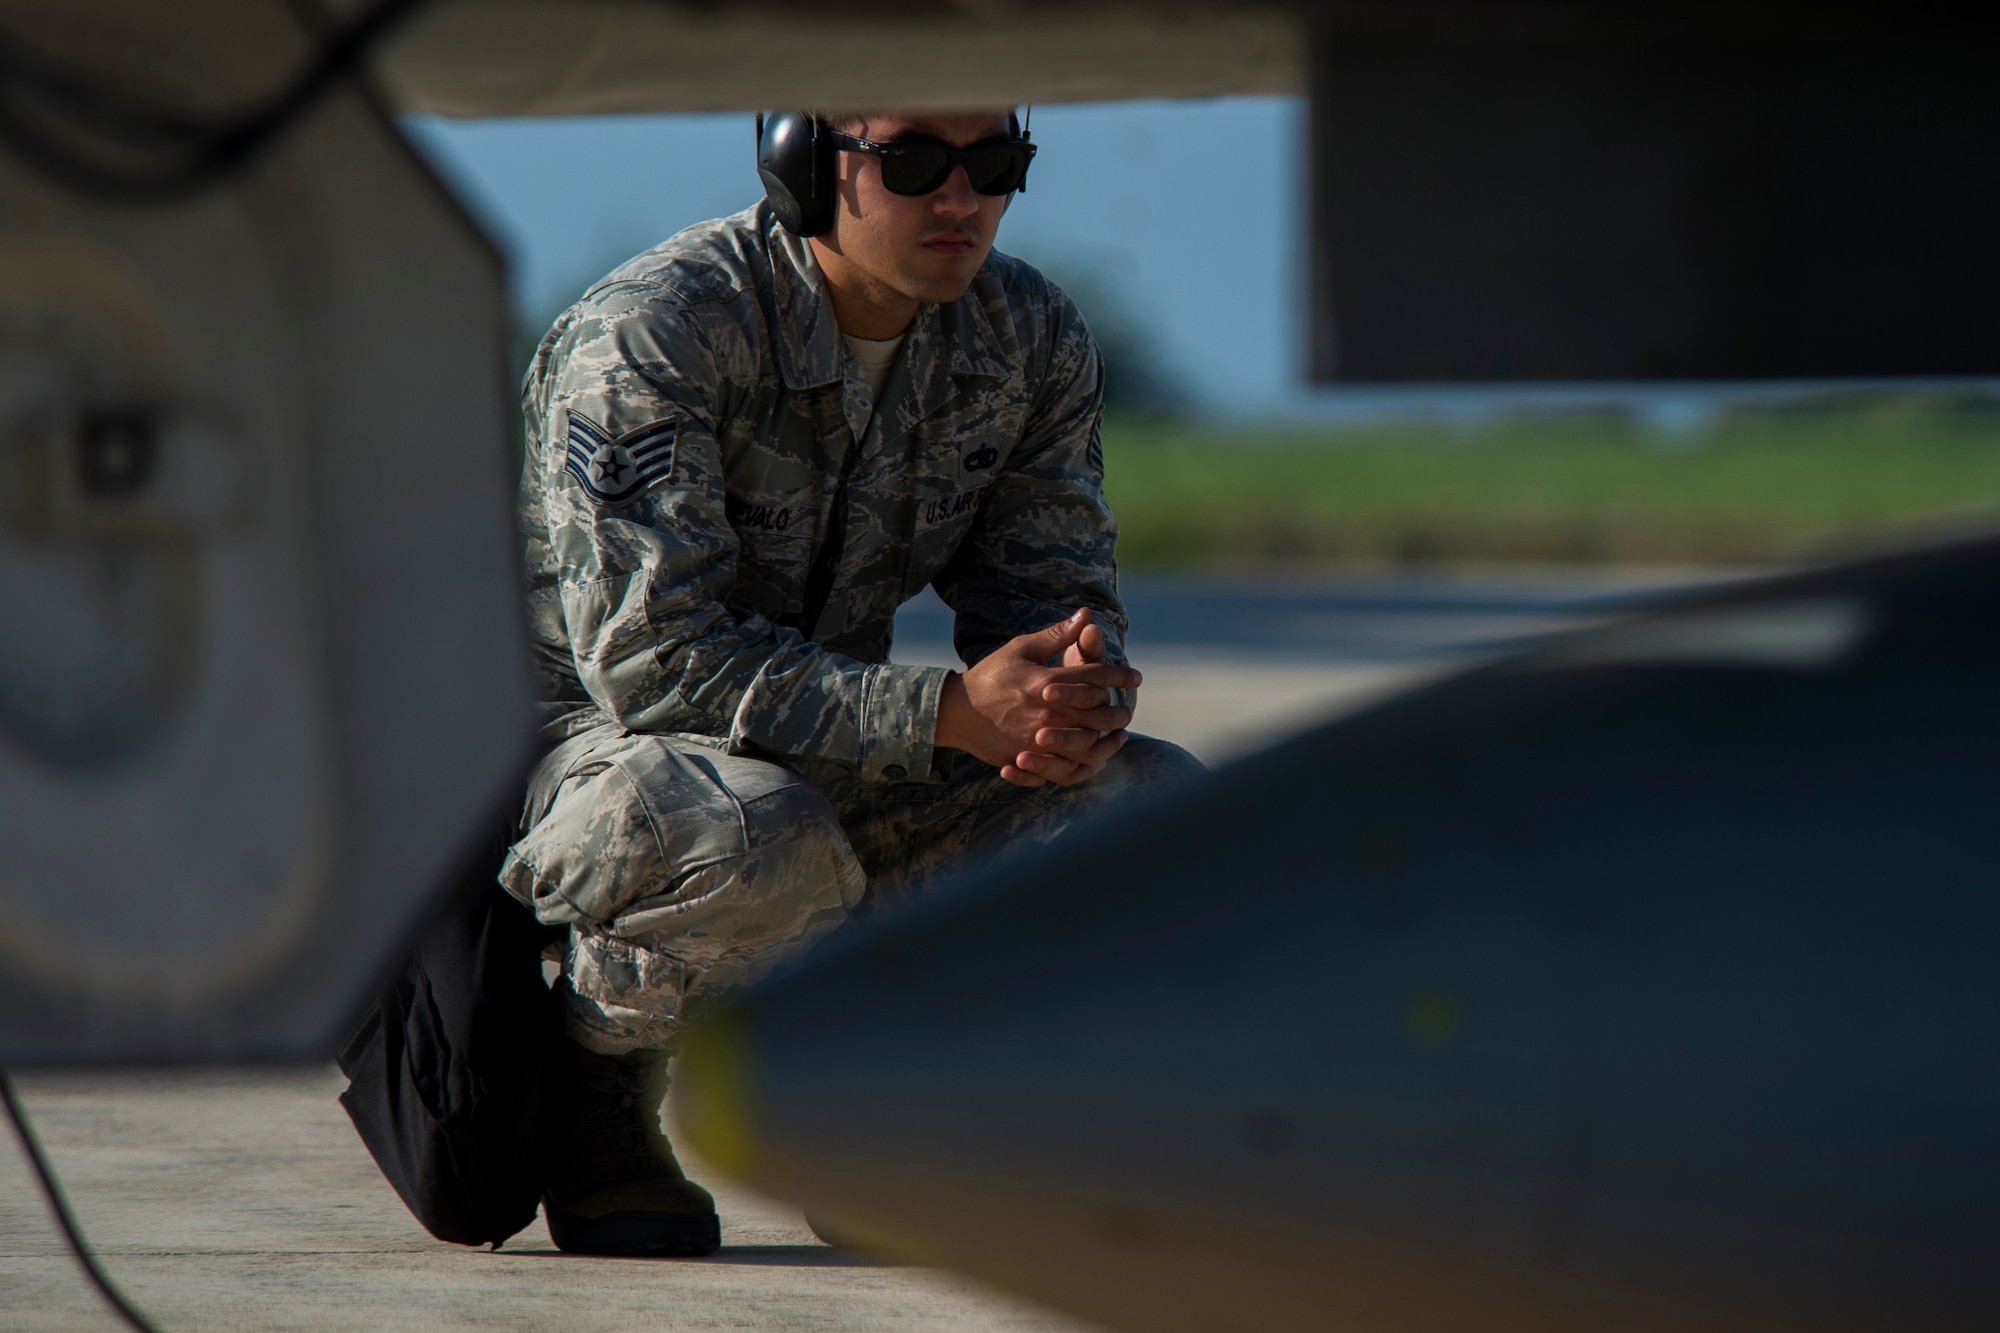 U.S. Air Force Staff Sgt. Joaquin Arevalo, a 52nd Aircraft Maintenance Squadron weapons load crew chief, looks over an F-16 Fighting Falcon fighter aircraft, assigned to 480th Fighter Squadron, Spangdahlem Air Base, Germany, before the start of the Trapani Air Show at Trapani Air Base, Italy, Oct. 19, 2015. The Trapani Air Show kicked off Trident Juncture 2015, a training exercise involving more than 30 Allied and Partner Nations taking place throughout Italy, Portugal, Spain, the Atlantic Ocean, the Mediterranean Sea, Canada, Norway, Germany, Belgium and the Netherlands. (U.S. Air Force photo by Airman 1st Class Luke Kitterman/Released)

